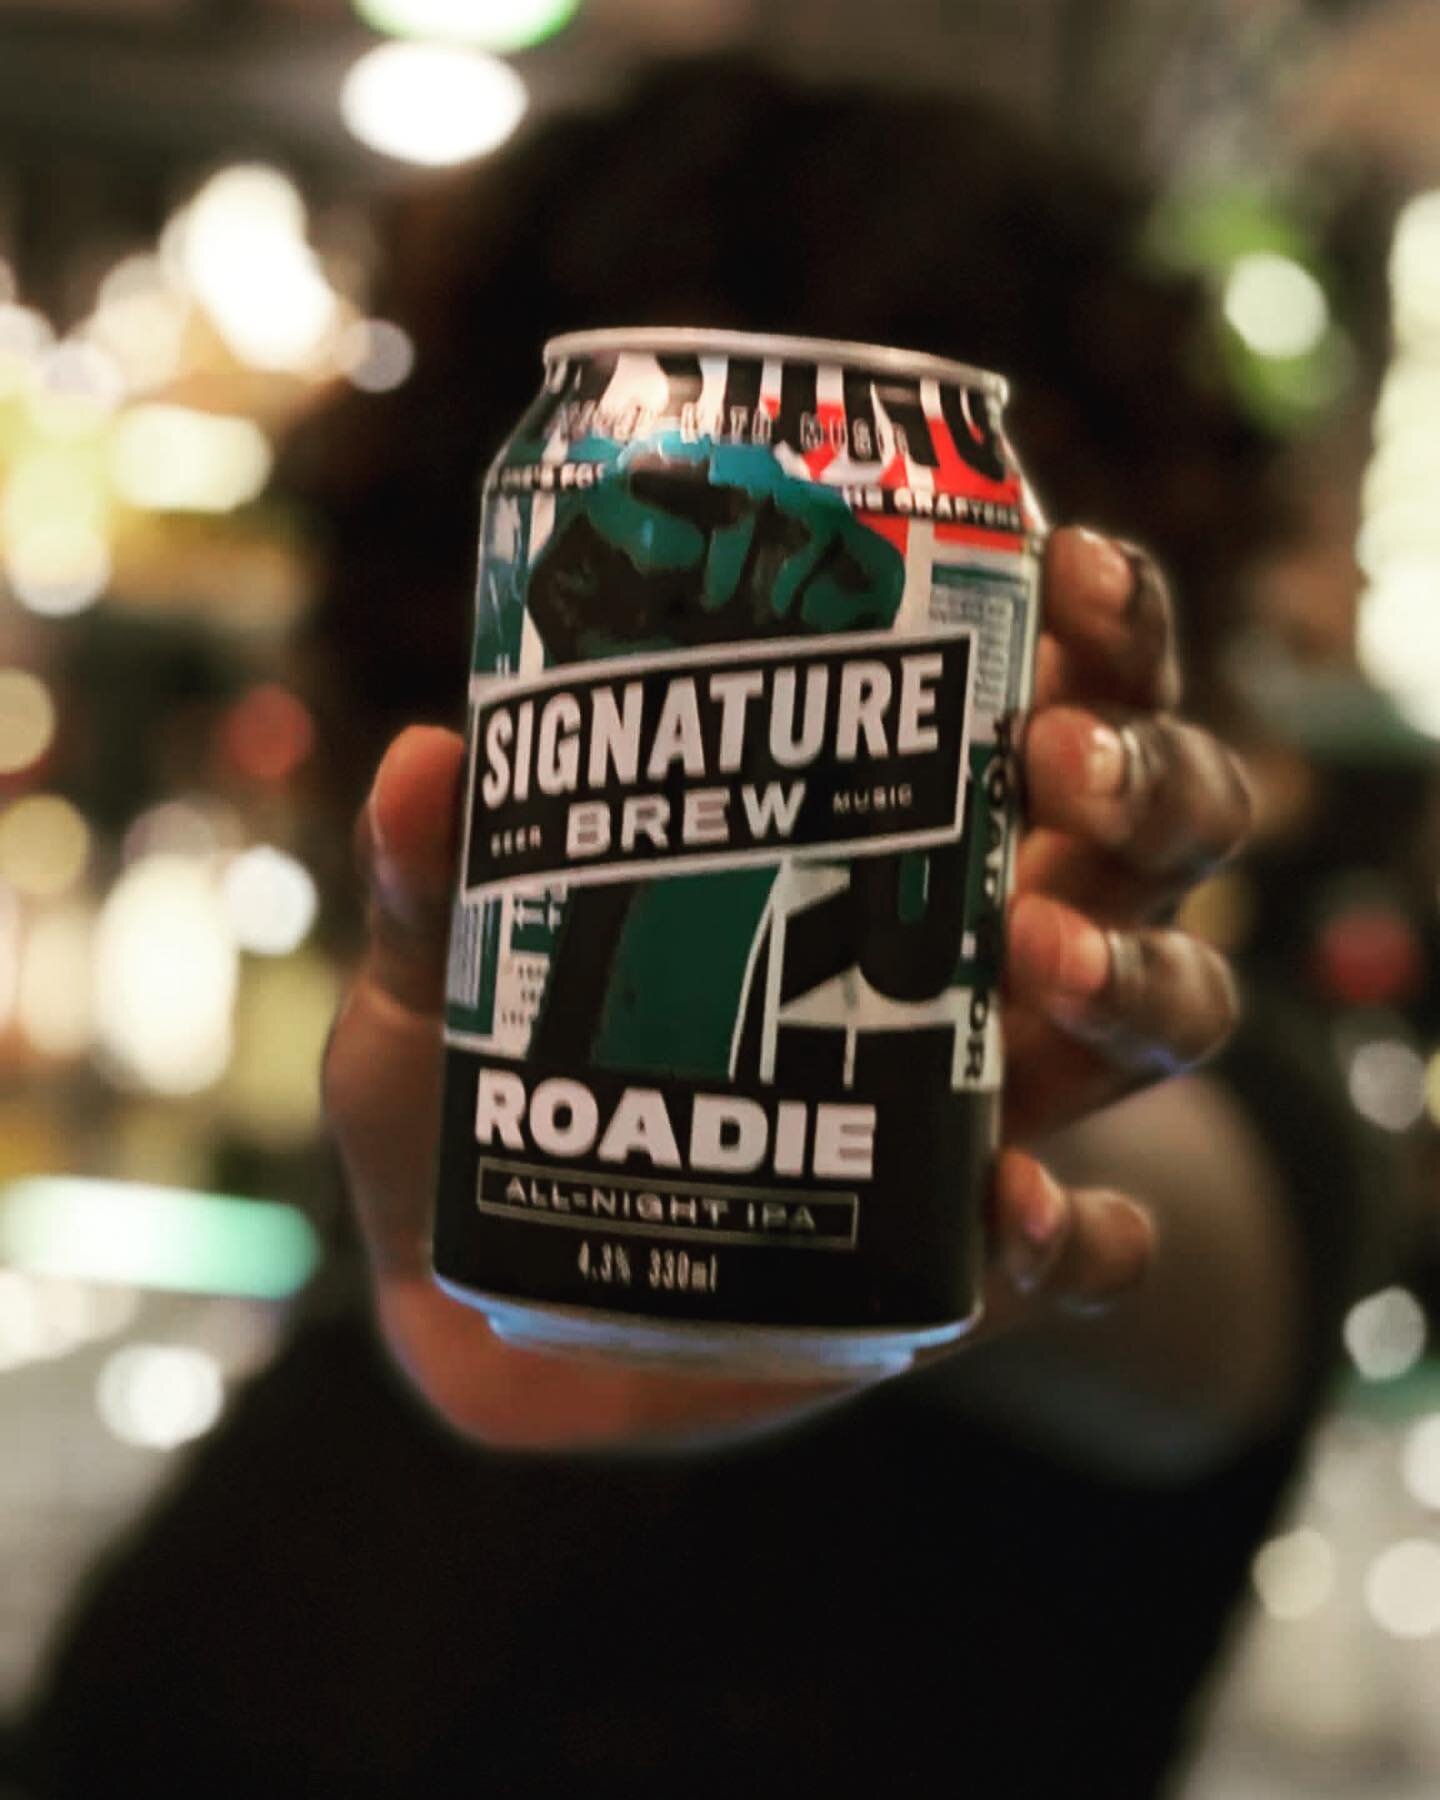 We have some great canned bears at @thearchwaytavern - one of them is @signaturebrew Roadie IPA! Come down with your mates and grab one (or three) 💥 Open from 12pm to midnight everyday!

#thearchwaytavern #localpub #pub #goingout #beer #brewery #nor